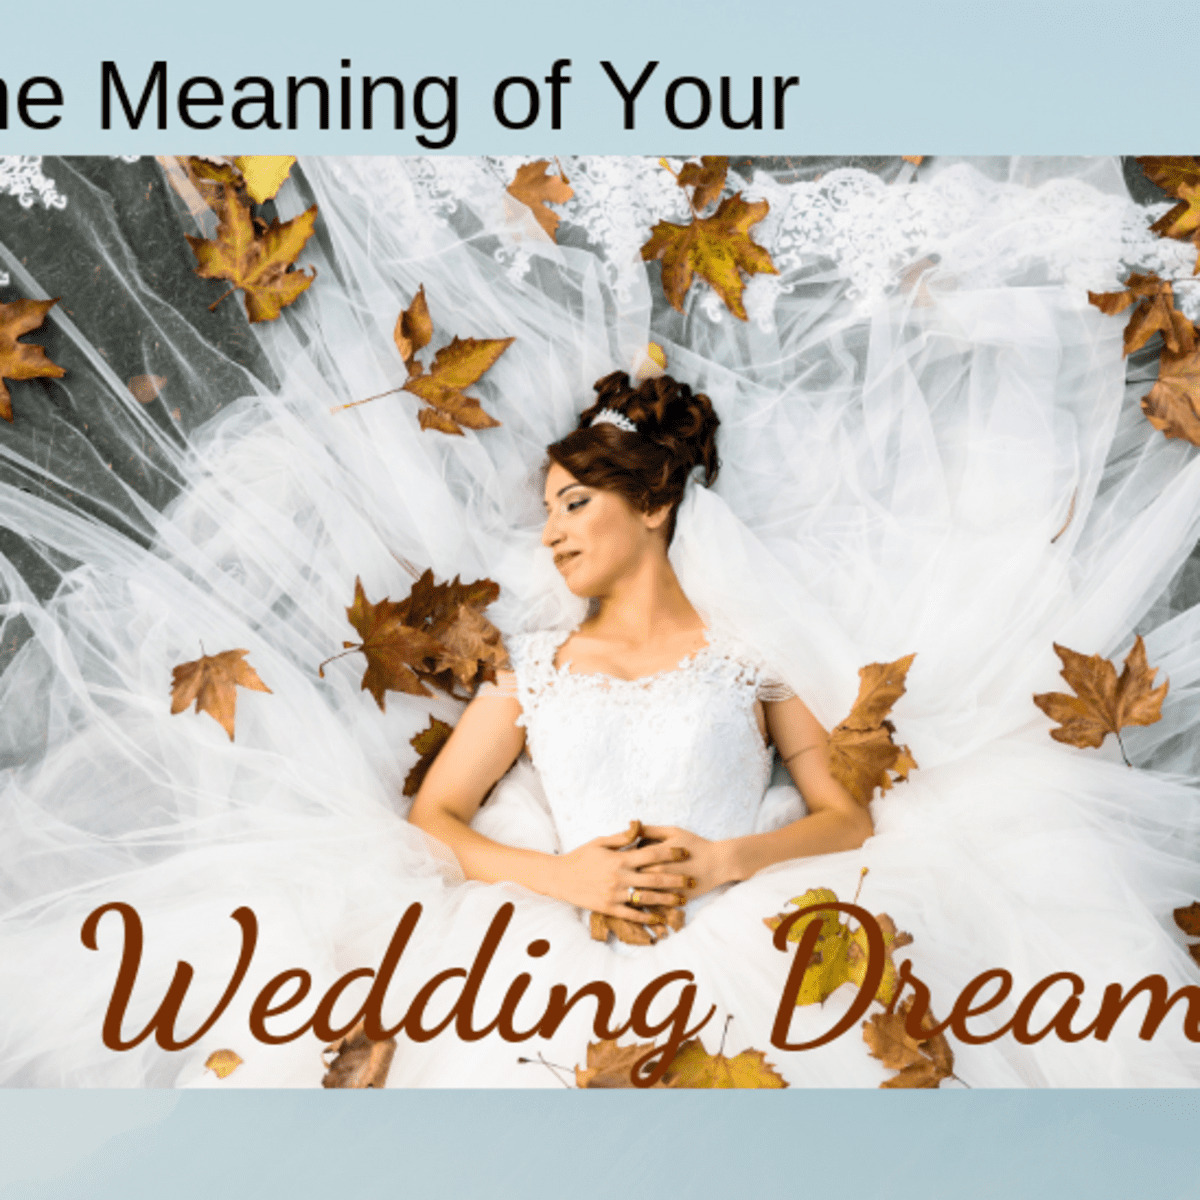 Dreaming Of A Wedding As A Symbol Of Commitment